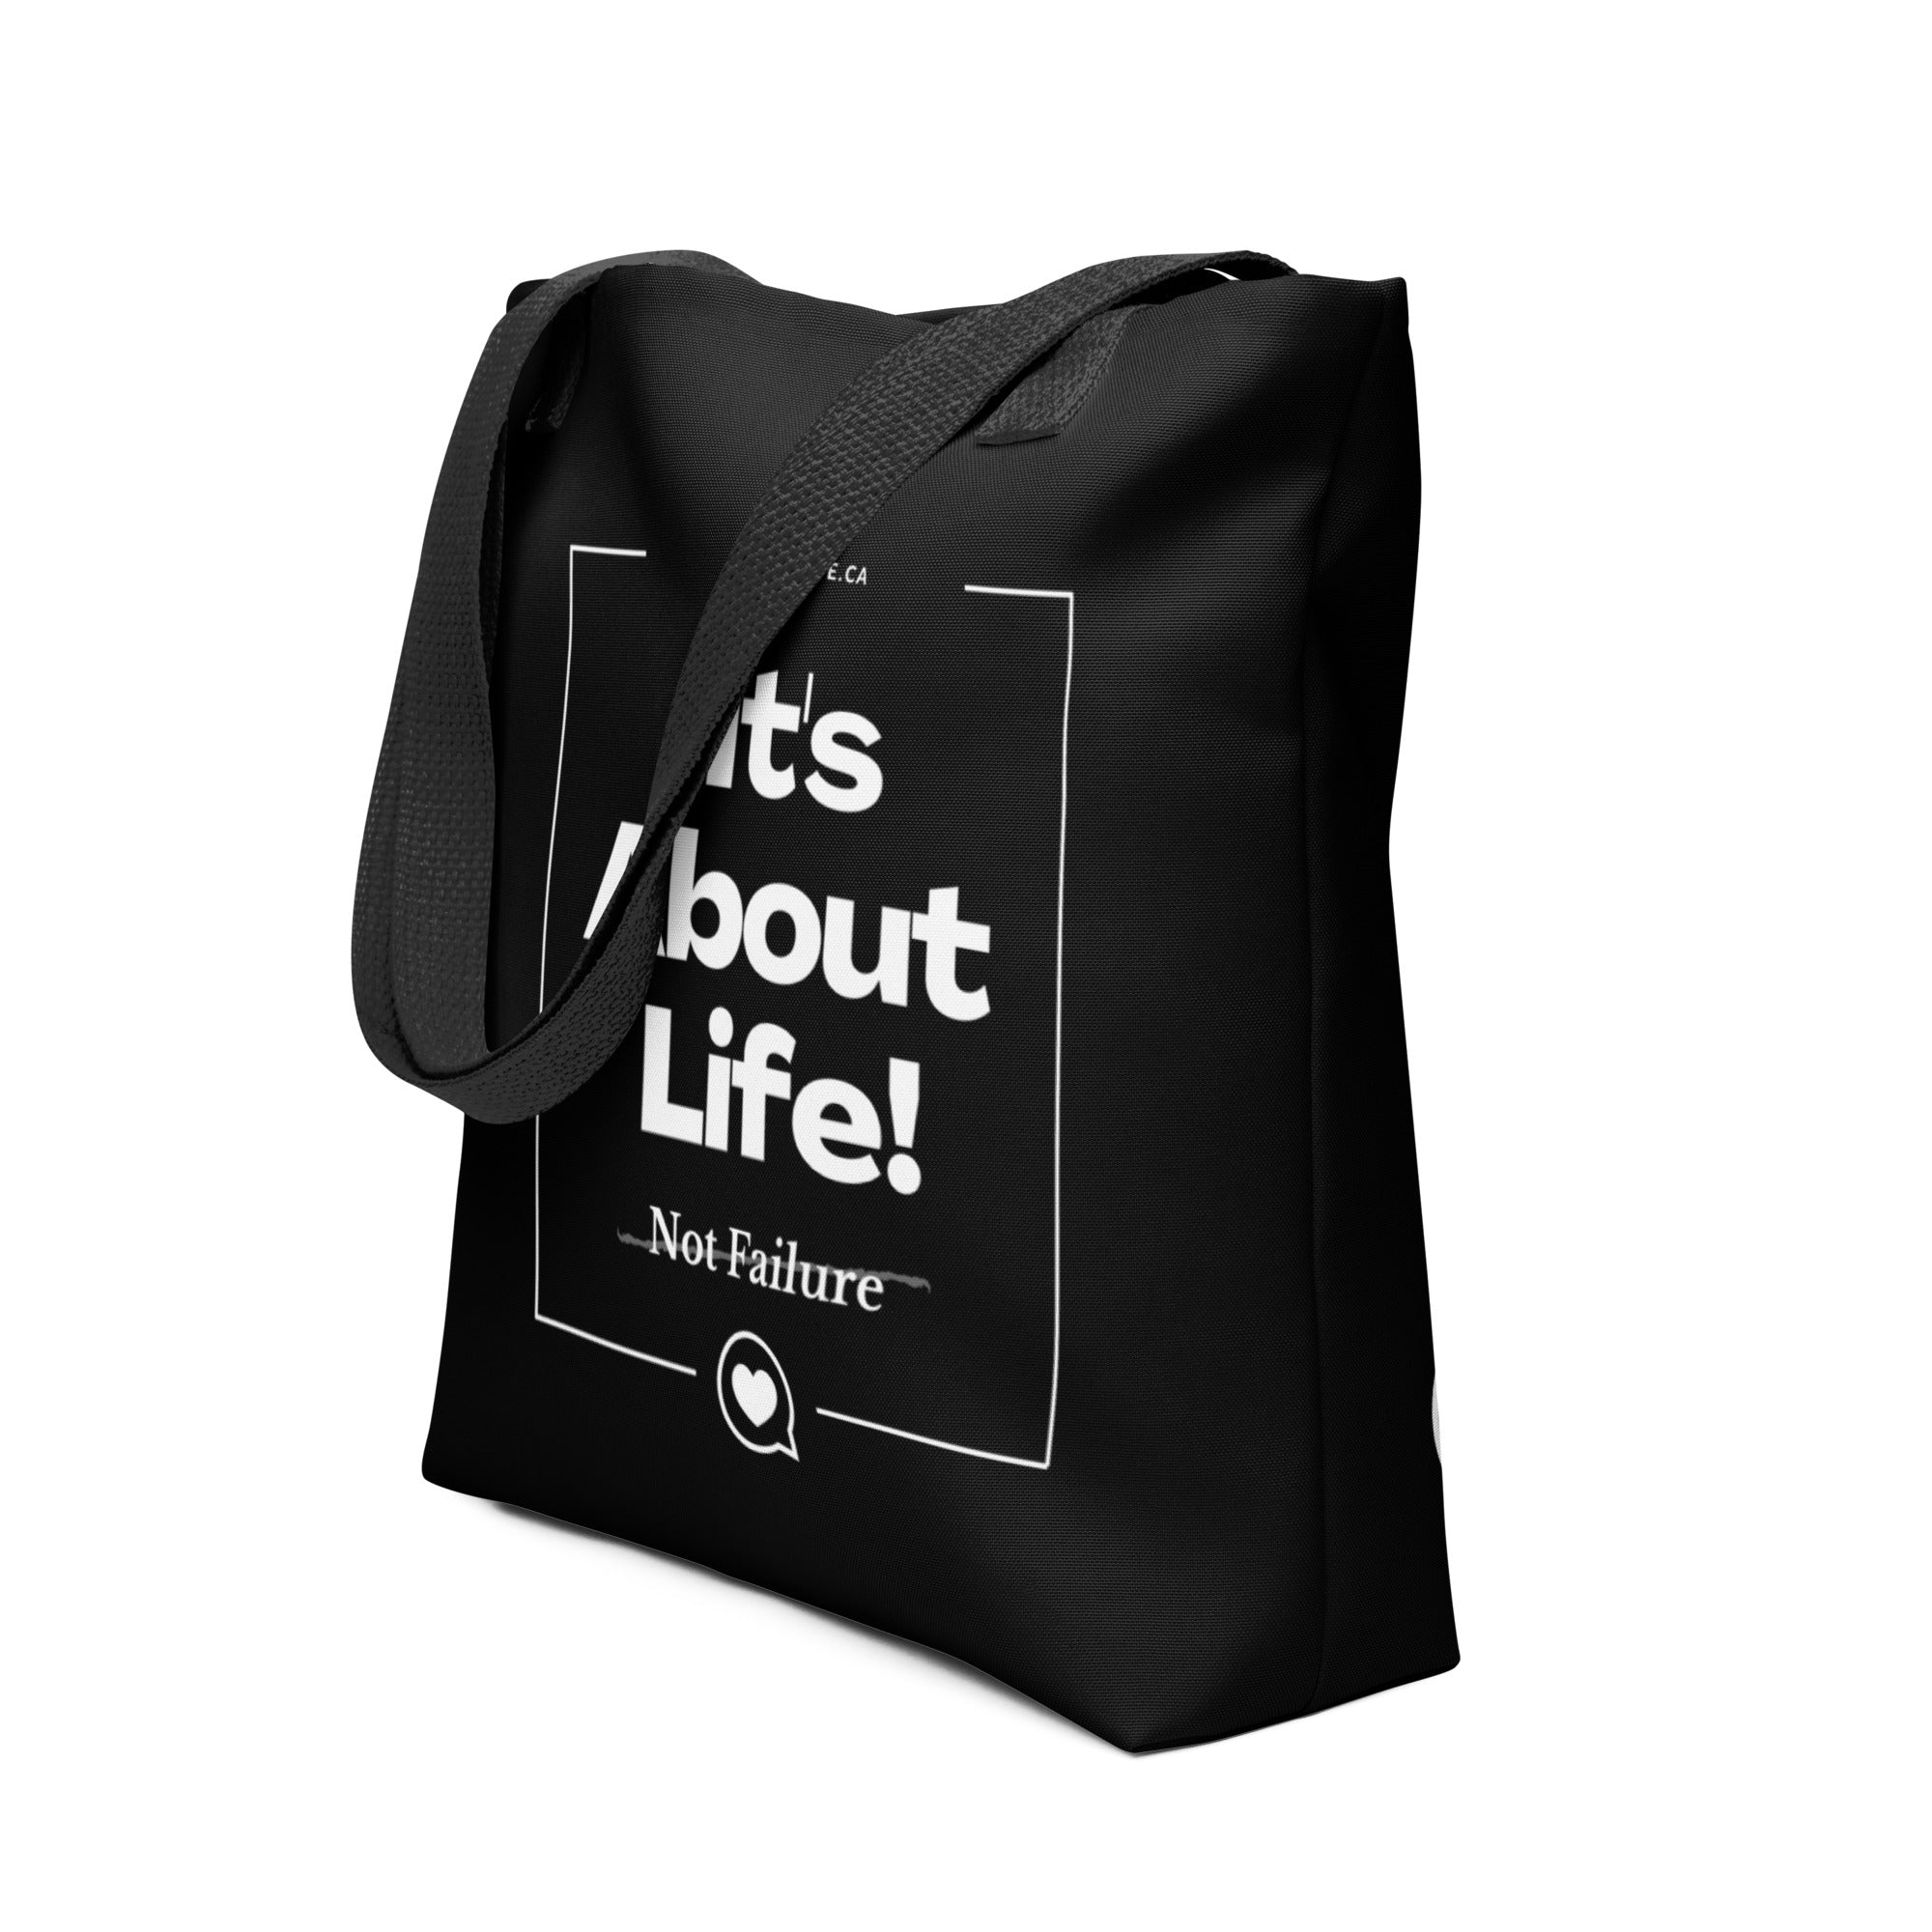 "It's About Life!" Tote Bag